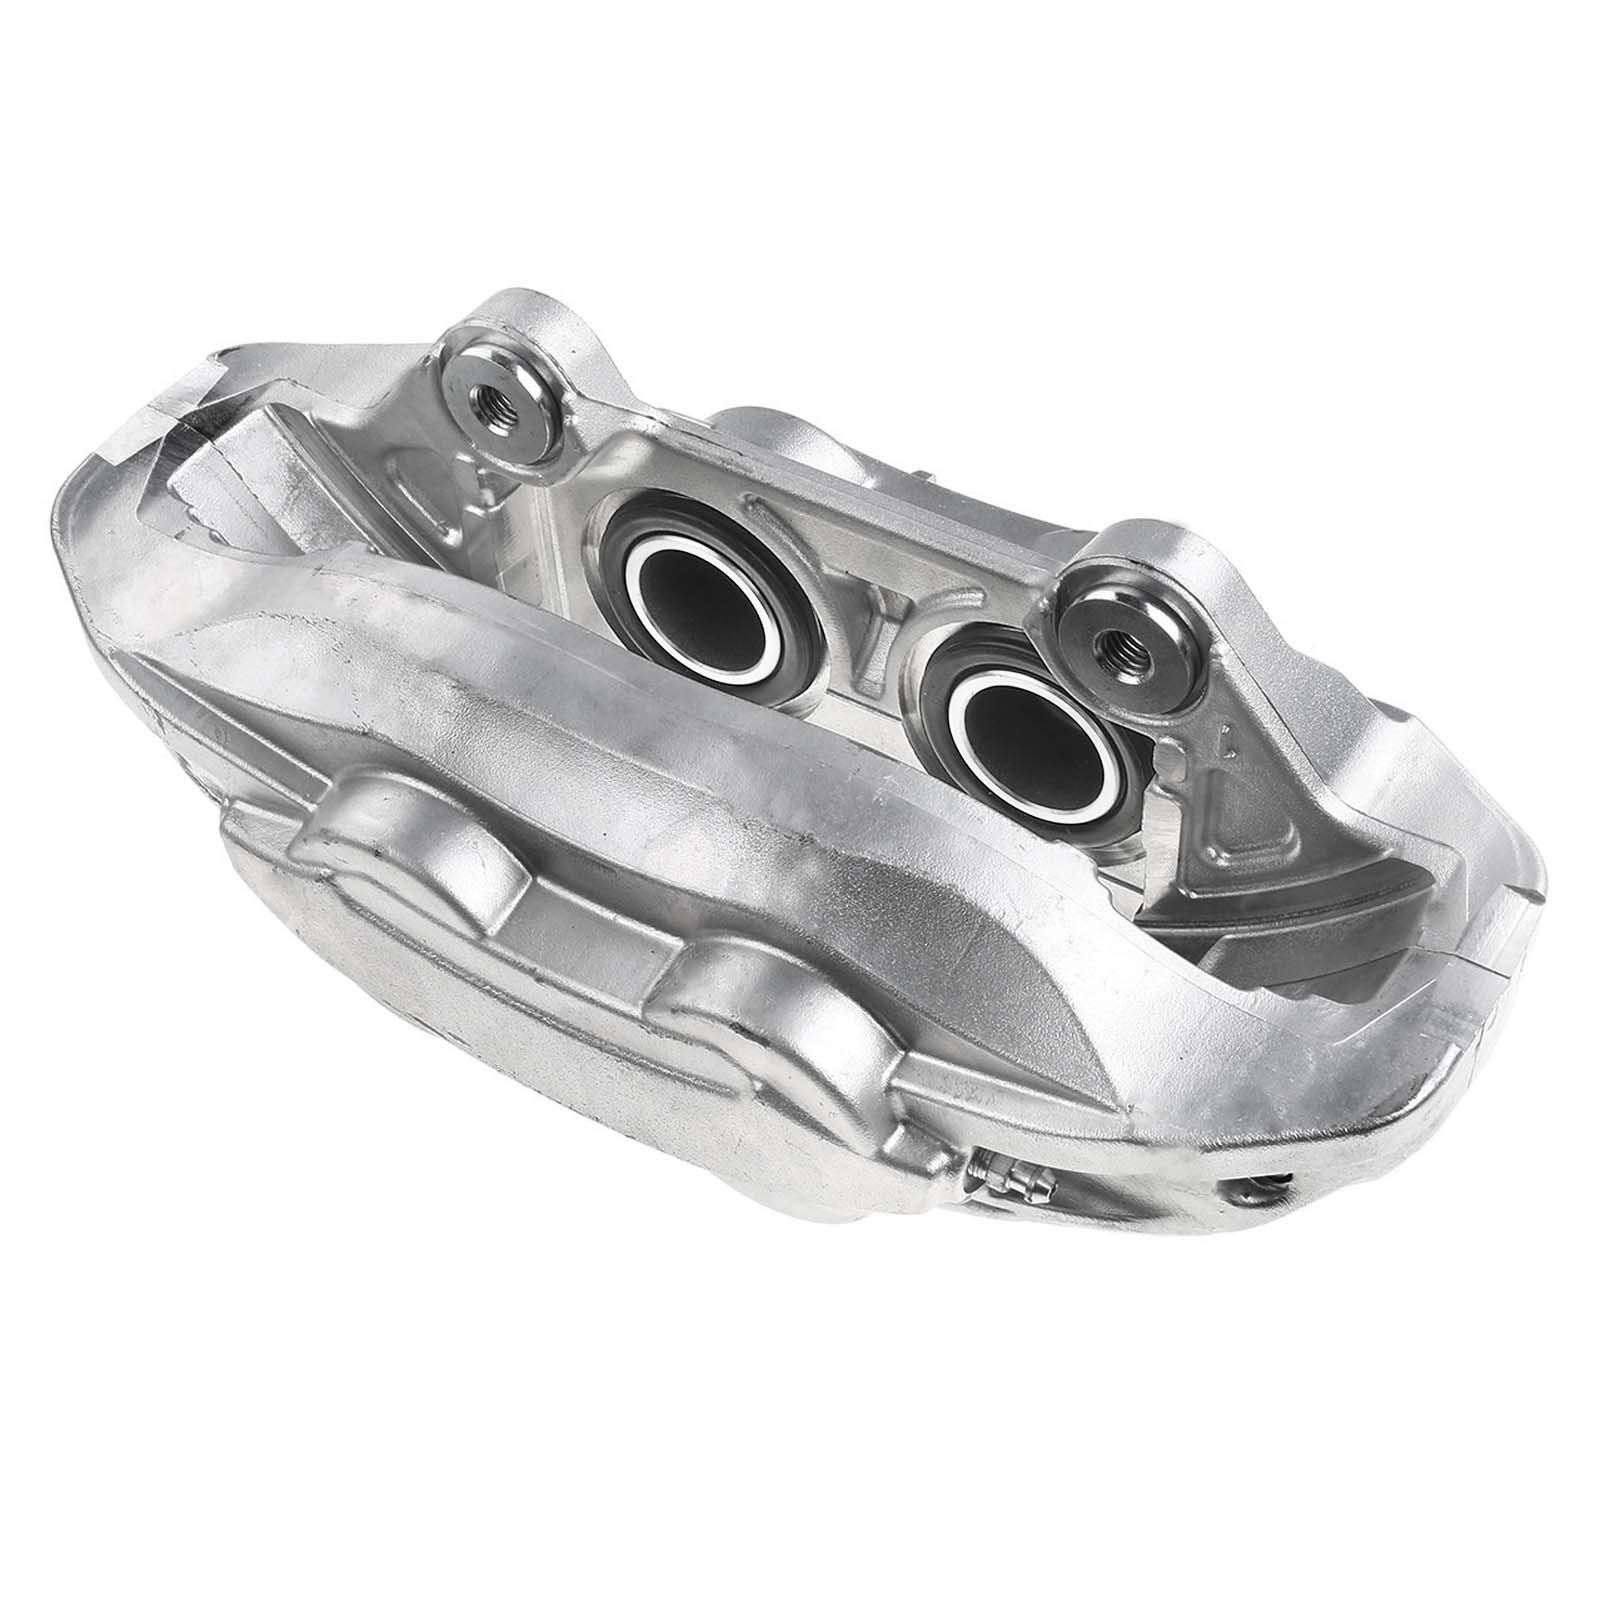 A-Premium Brake Caliper Assembly Compatible with Acura RL 1999-2004 Rear Passenger Side 